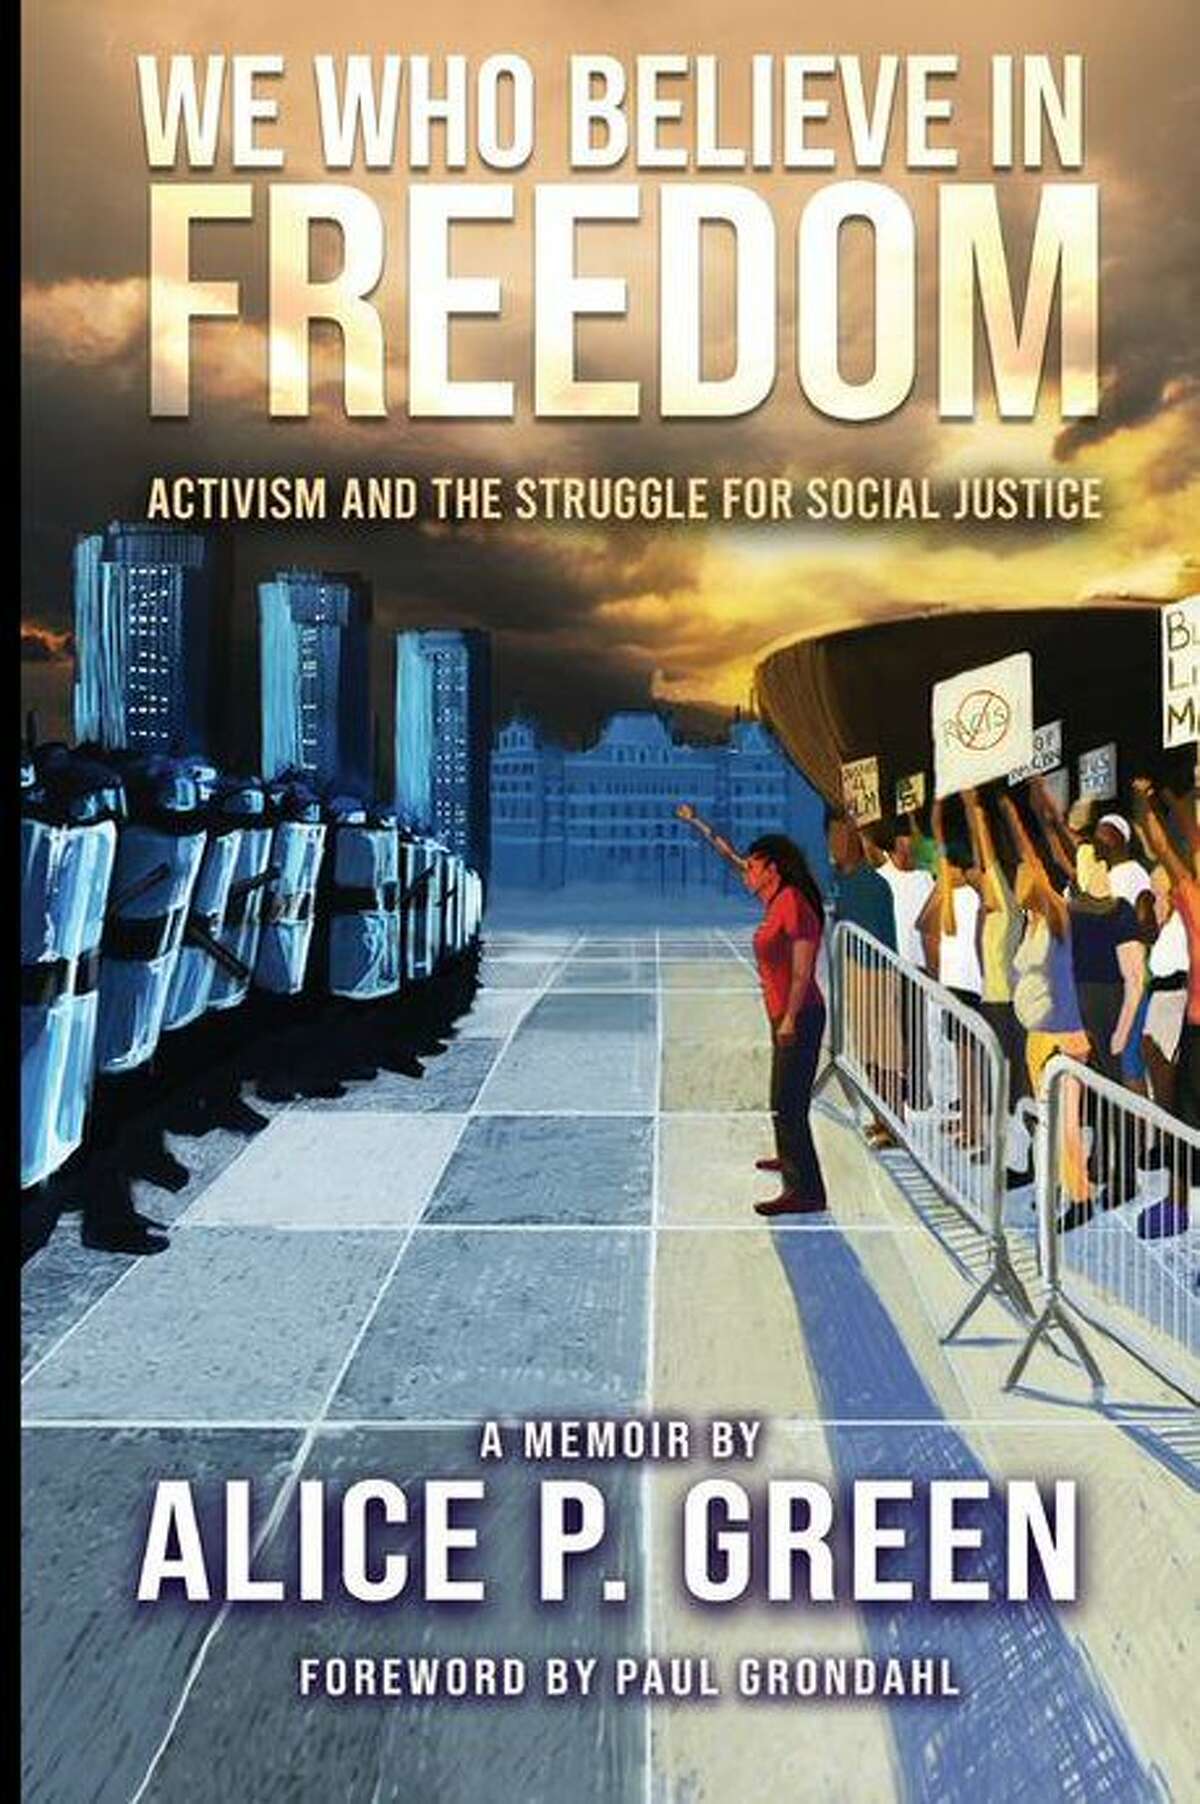 "We Who Believe in Freedom: Activism and the Struggle for Social Justice" by Alice Green.